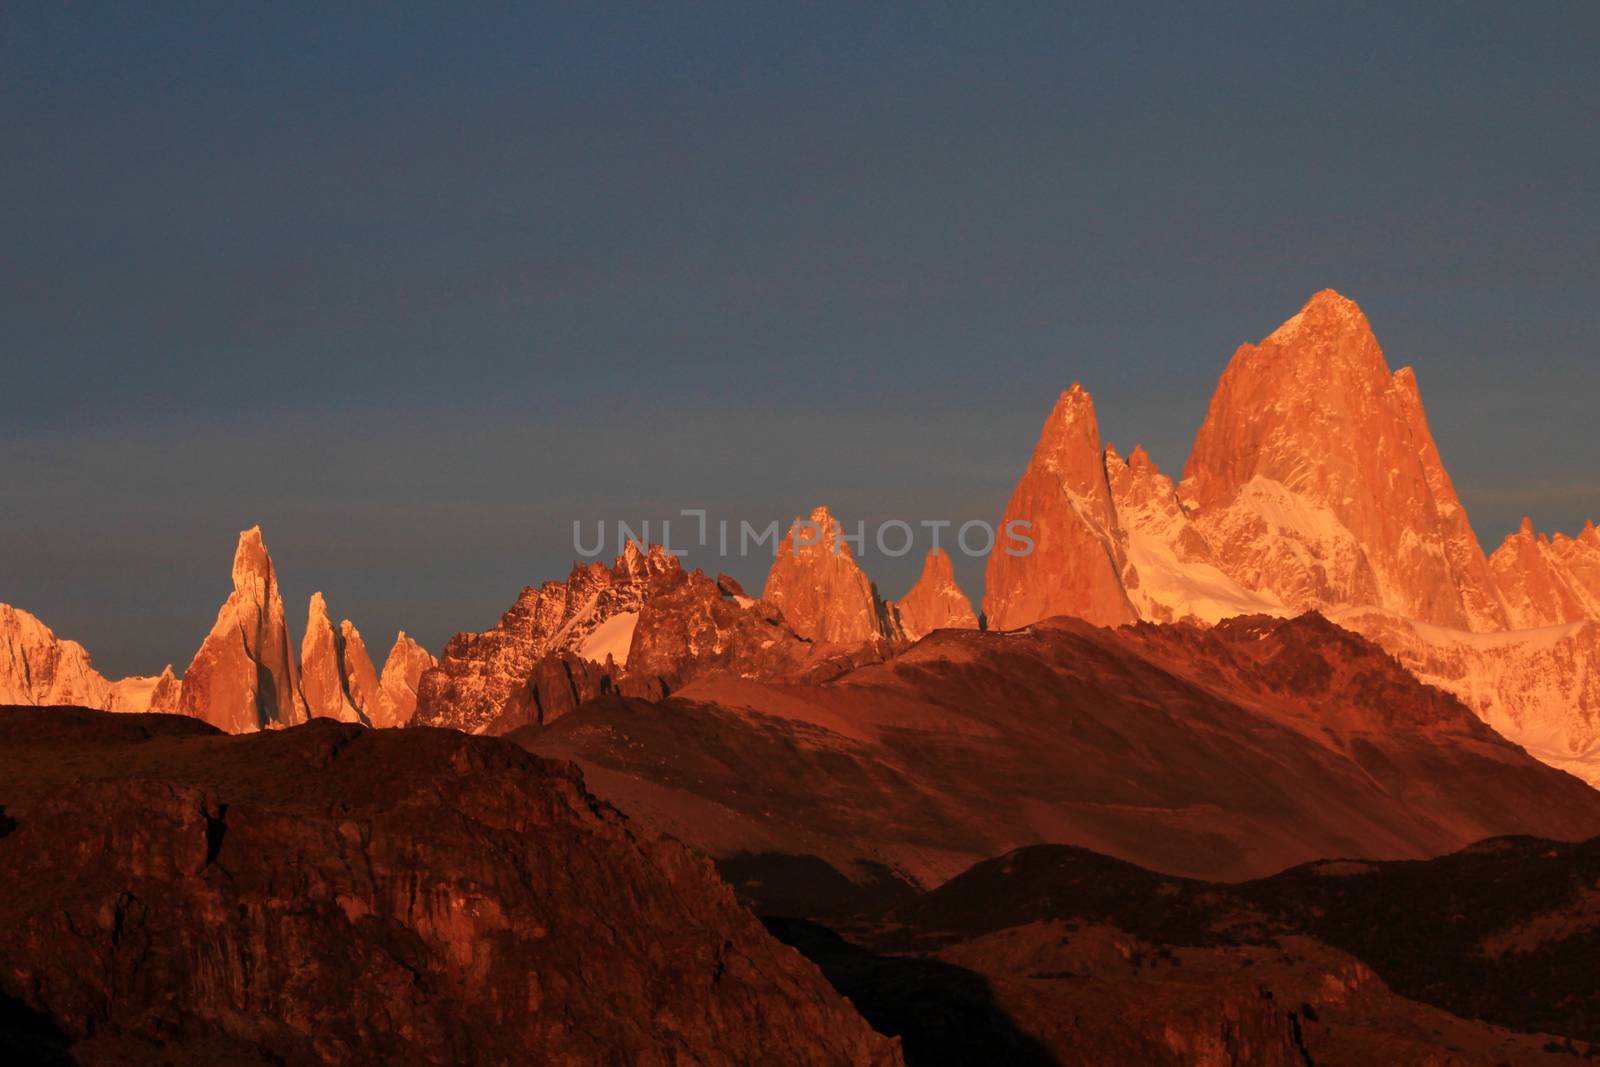 Fitz Roy and Cerro Torre mountainline at sunrise, Patagonia, Argentina by cicloco